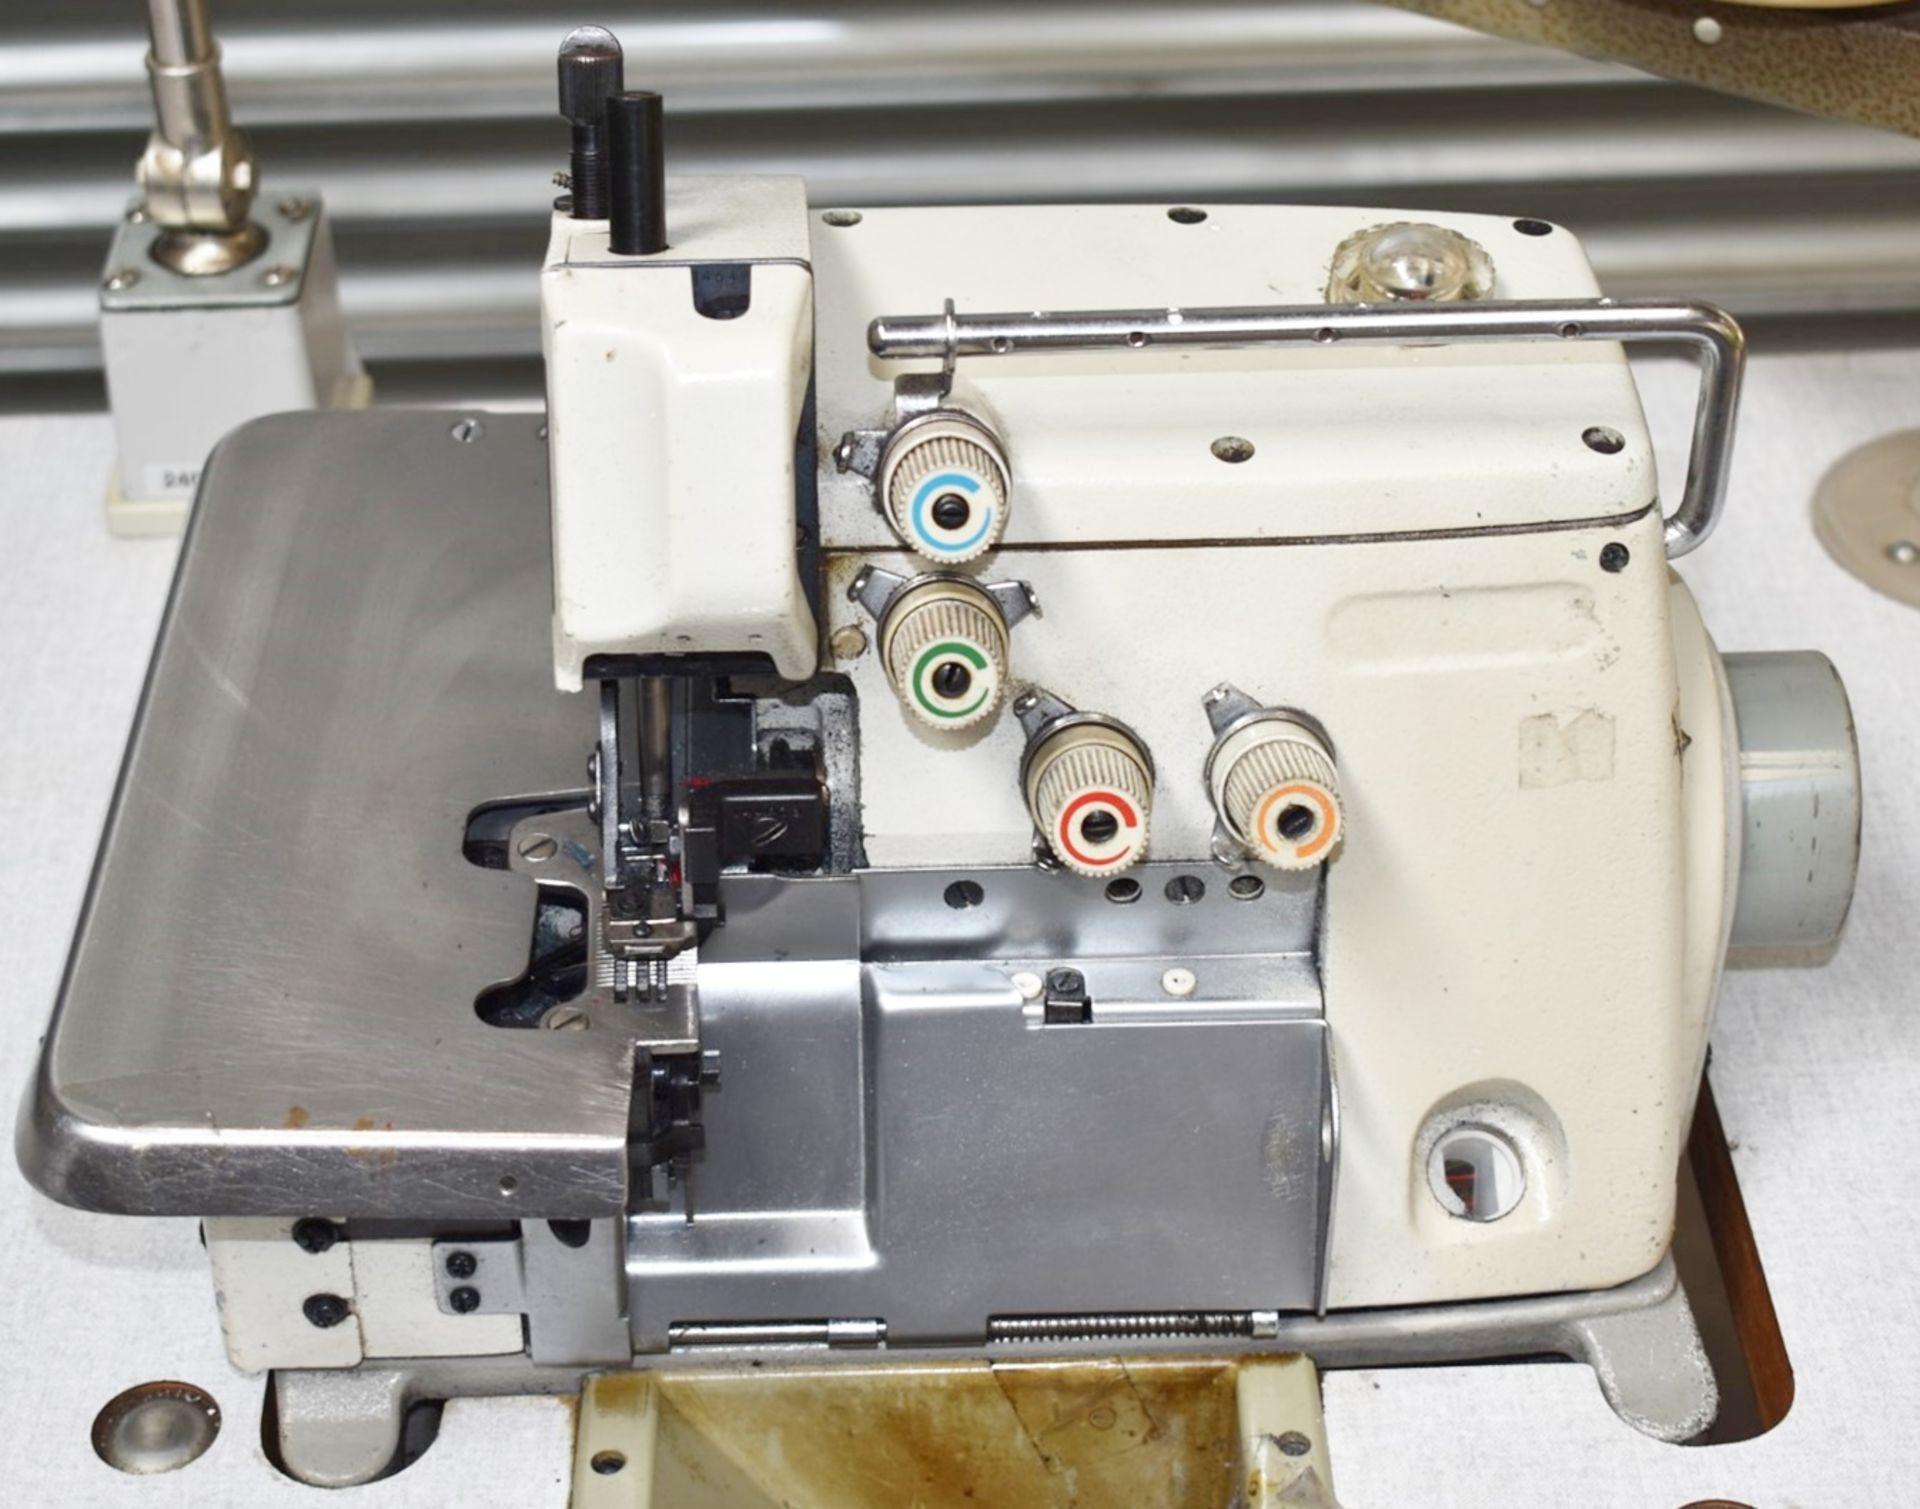 1 x Brother Overlock Industrial Sewing Machine - Model EF4-B531 - Image 11 of 27